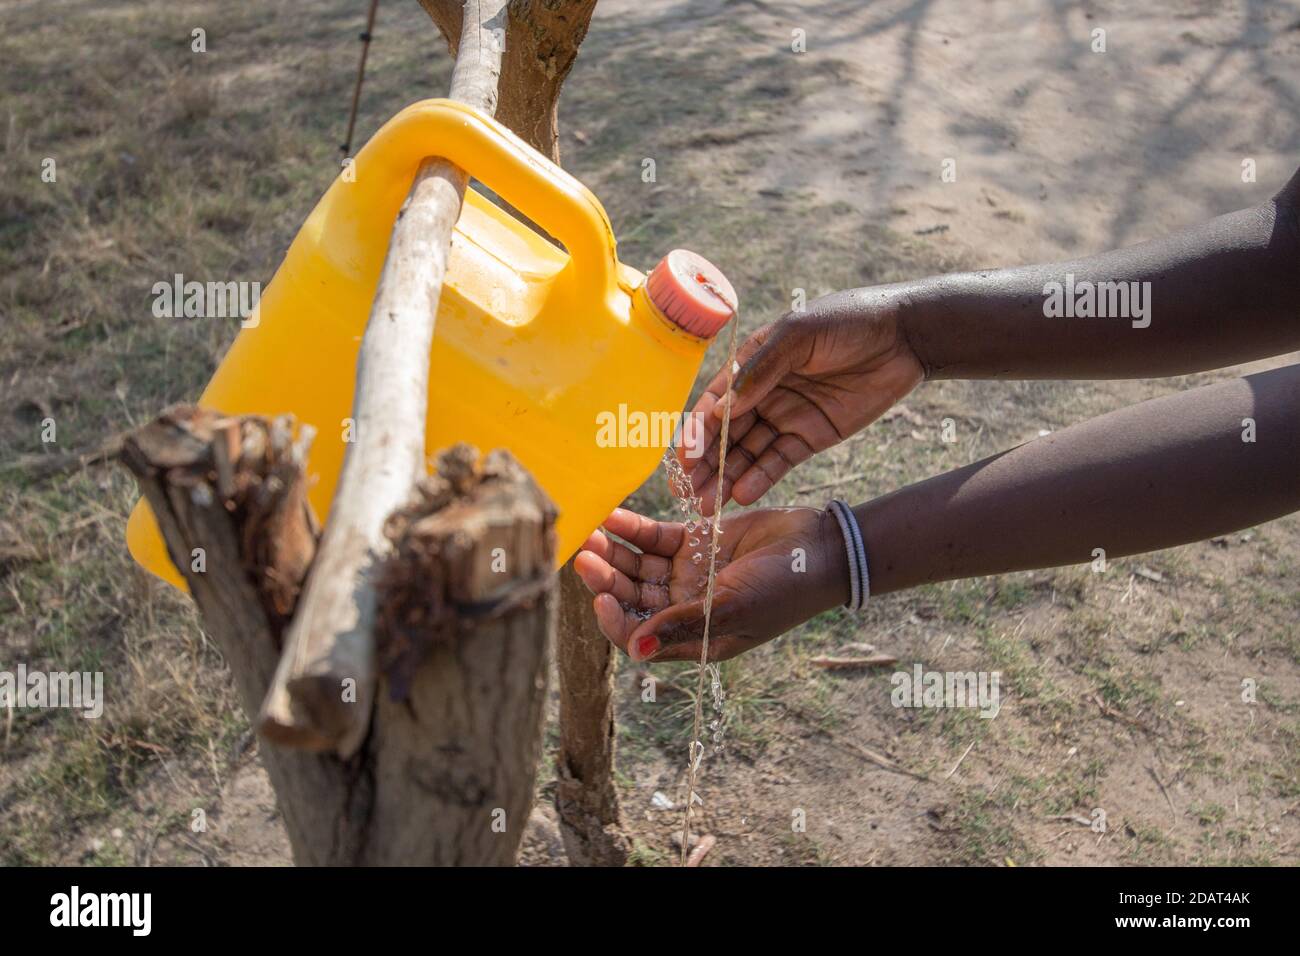 Hand washing innovation called tippy tap made of 5 liter can of water and a string, supported by two tree logs Stock Photo